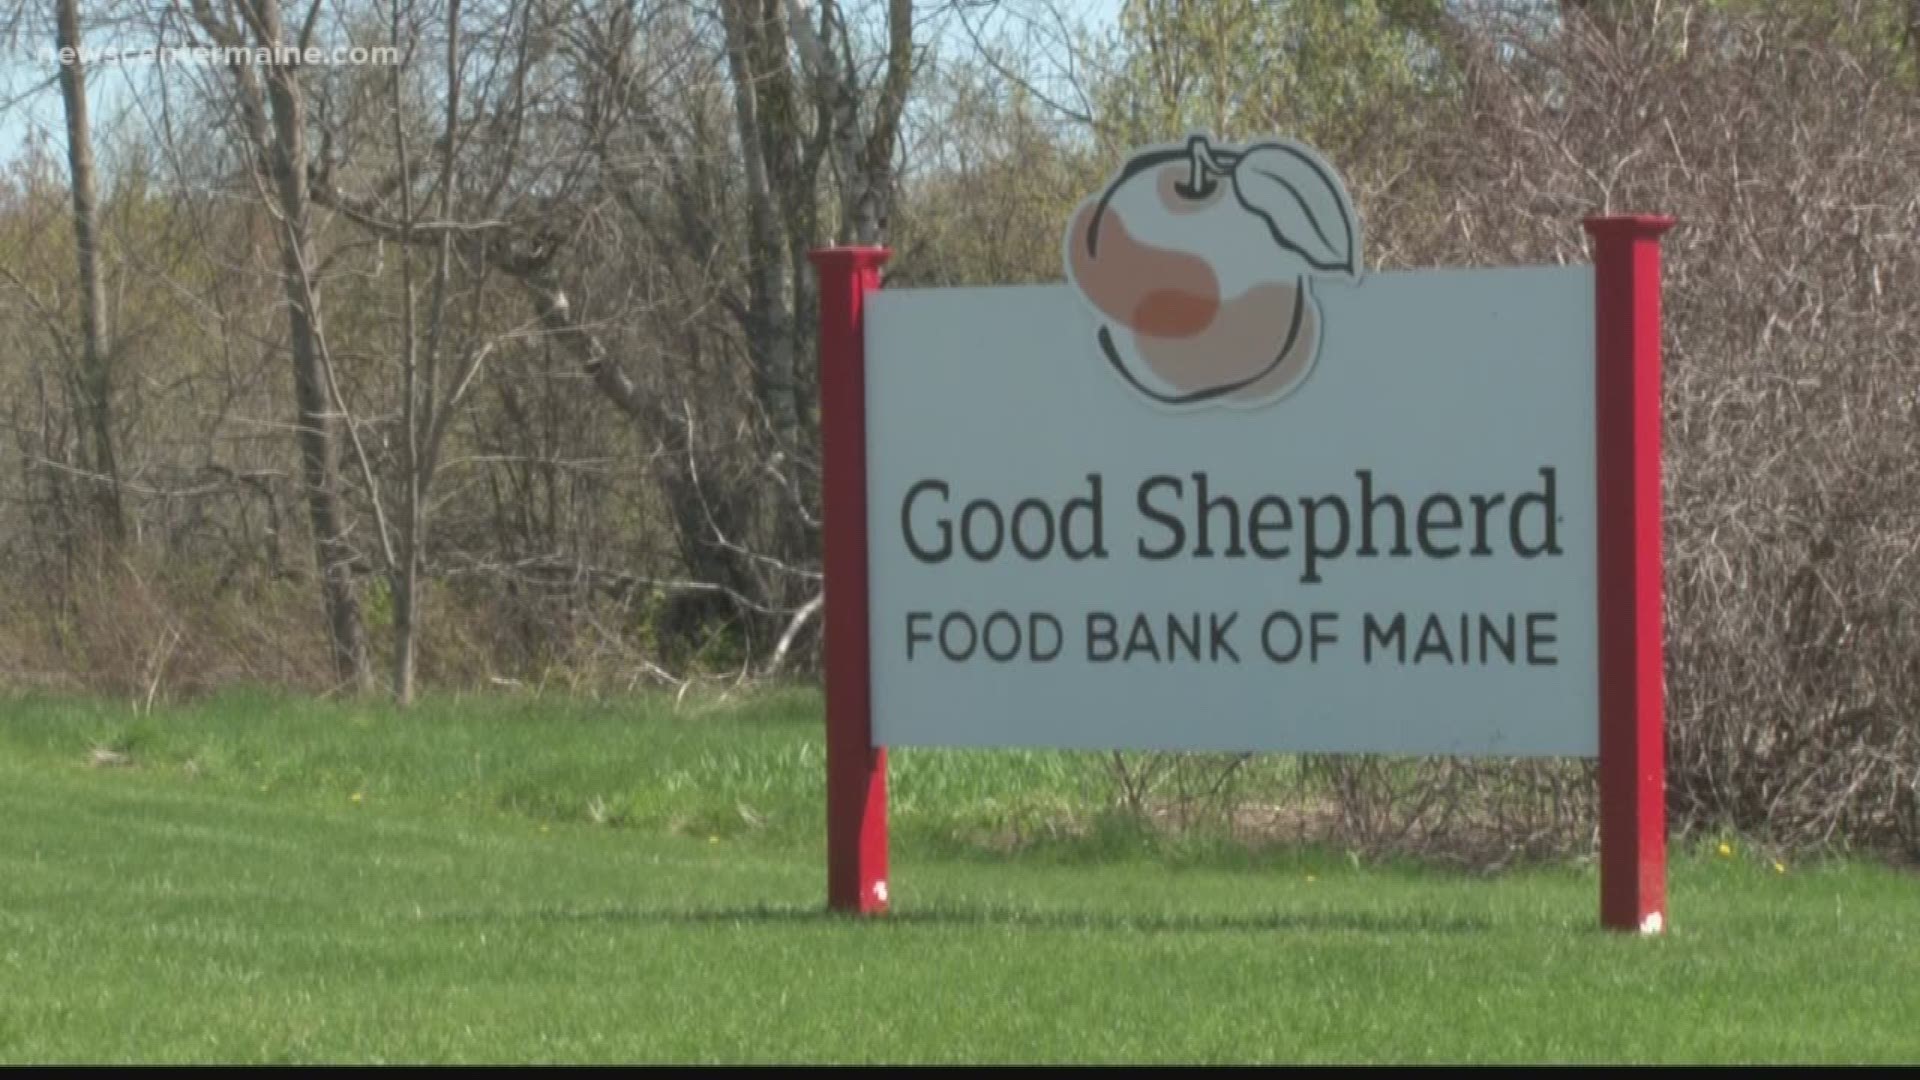 Food Bank looks to better serve mainers